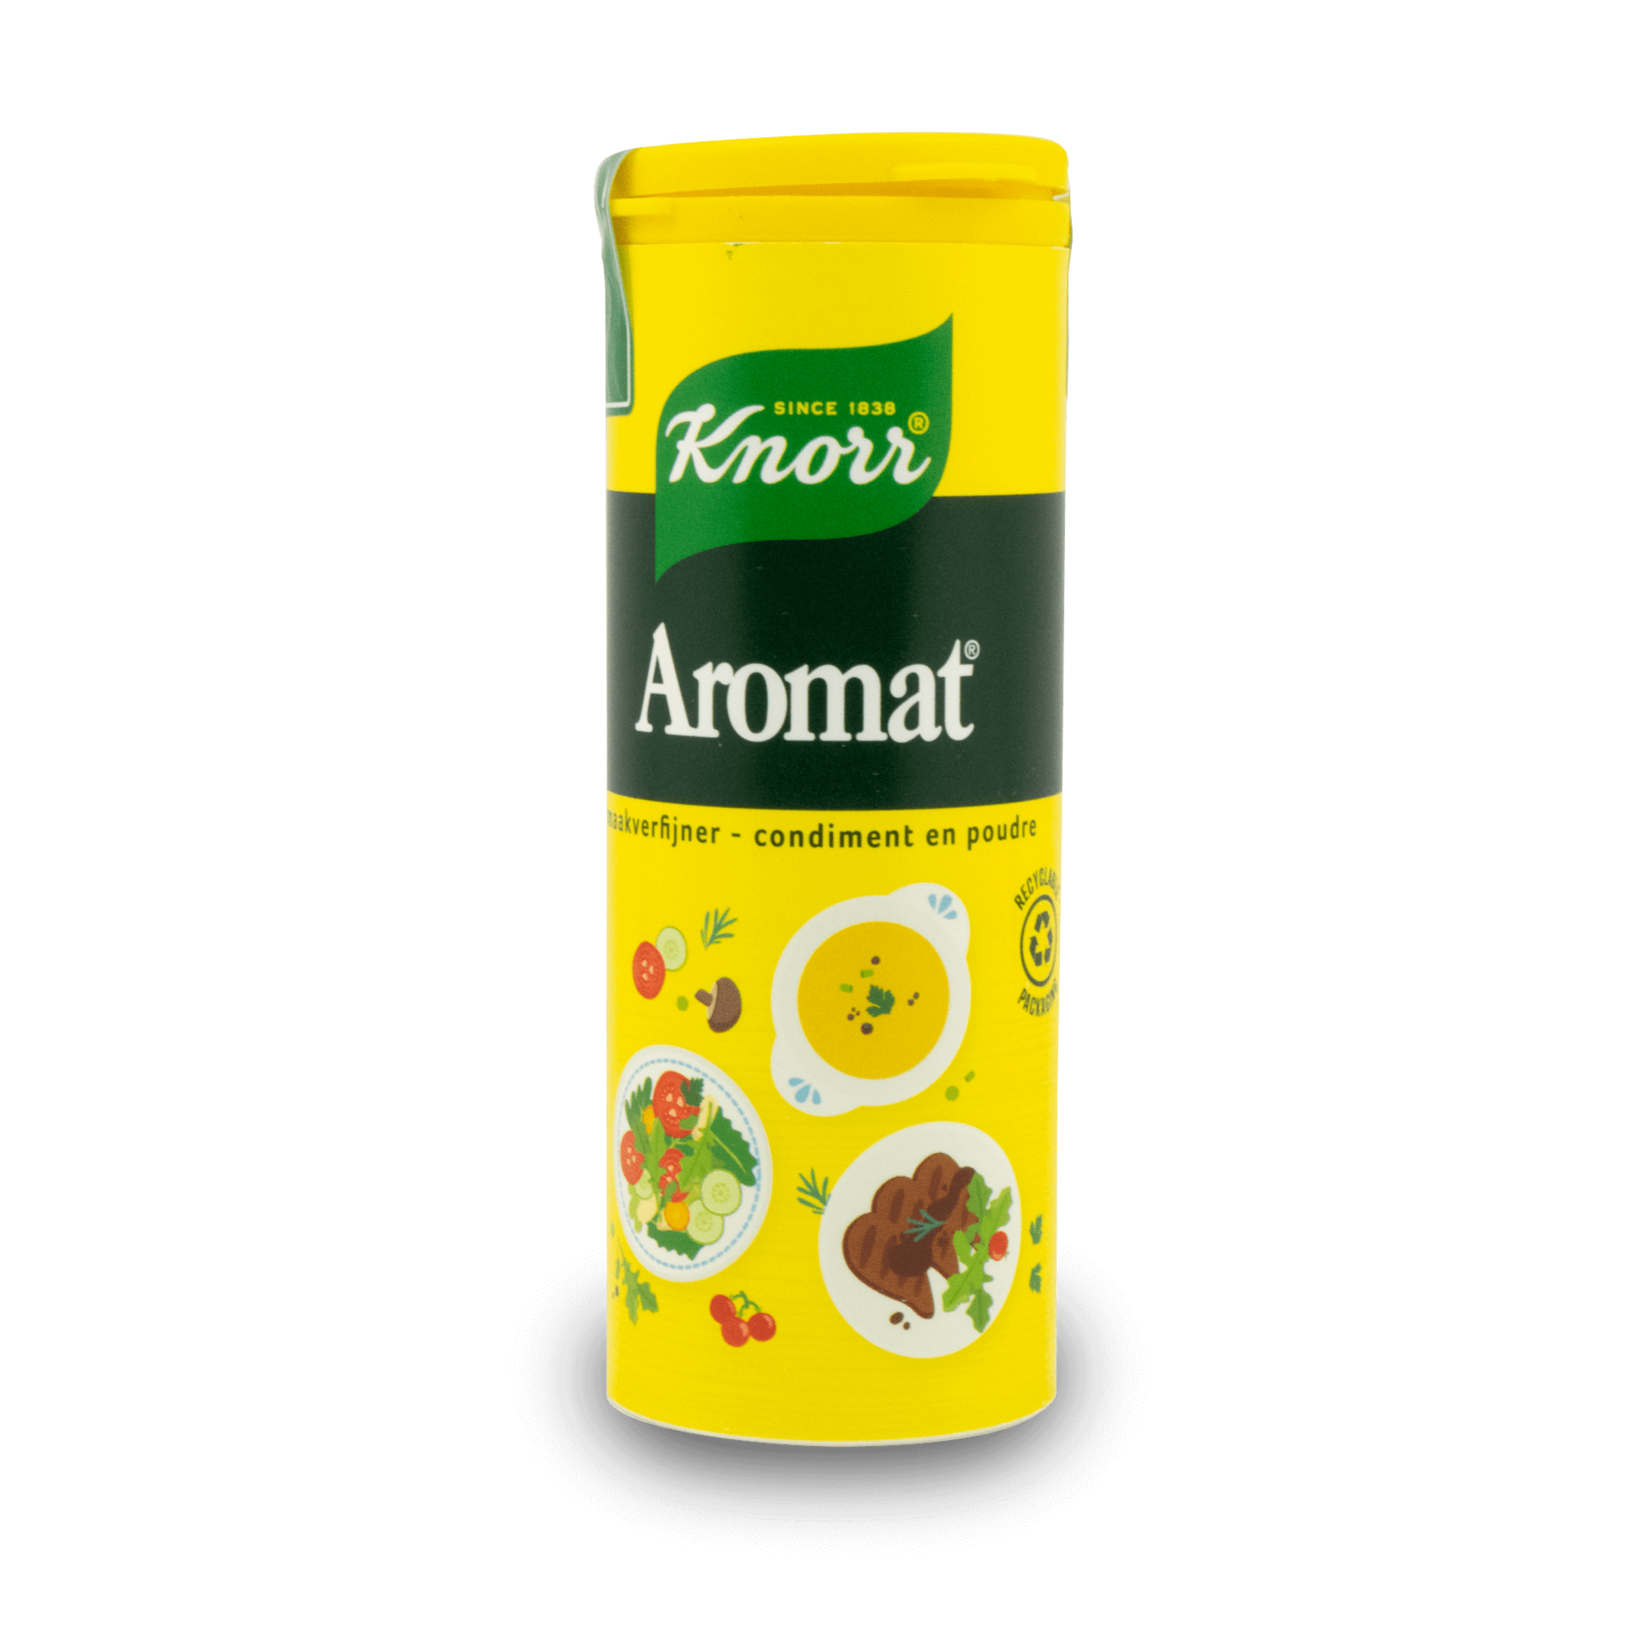 Knorr Aromat with a fine herbs 88g –